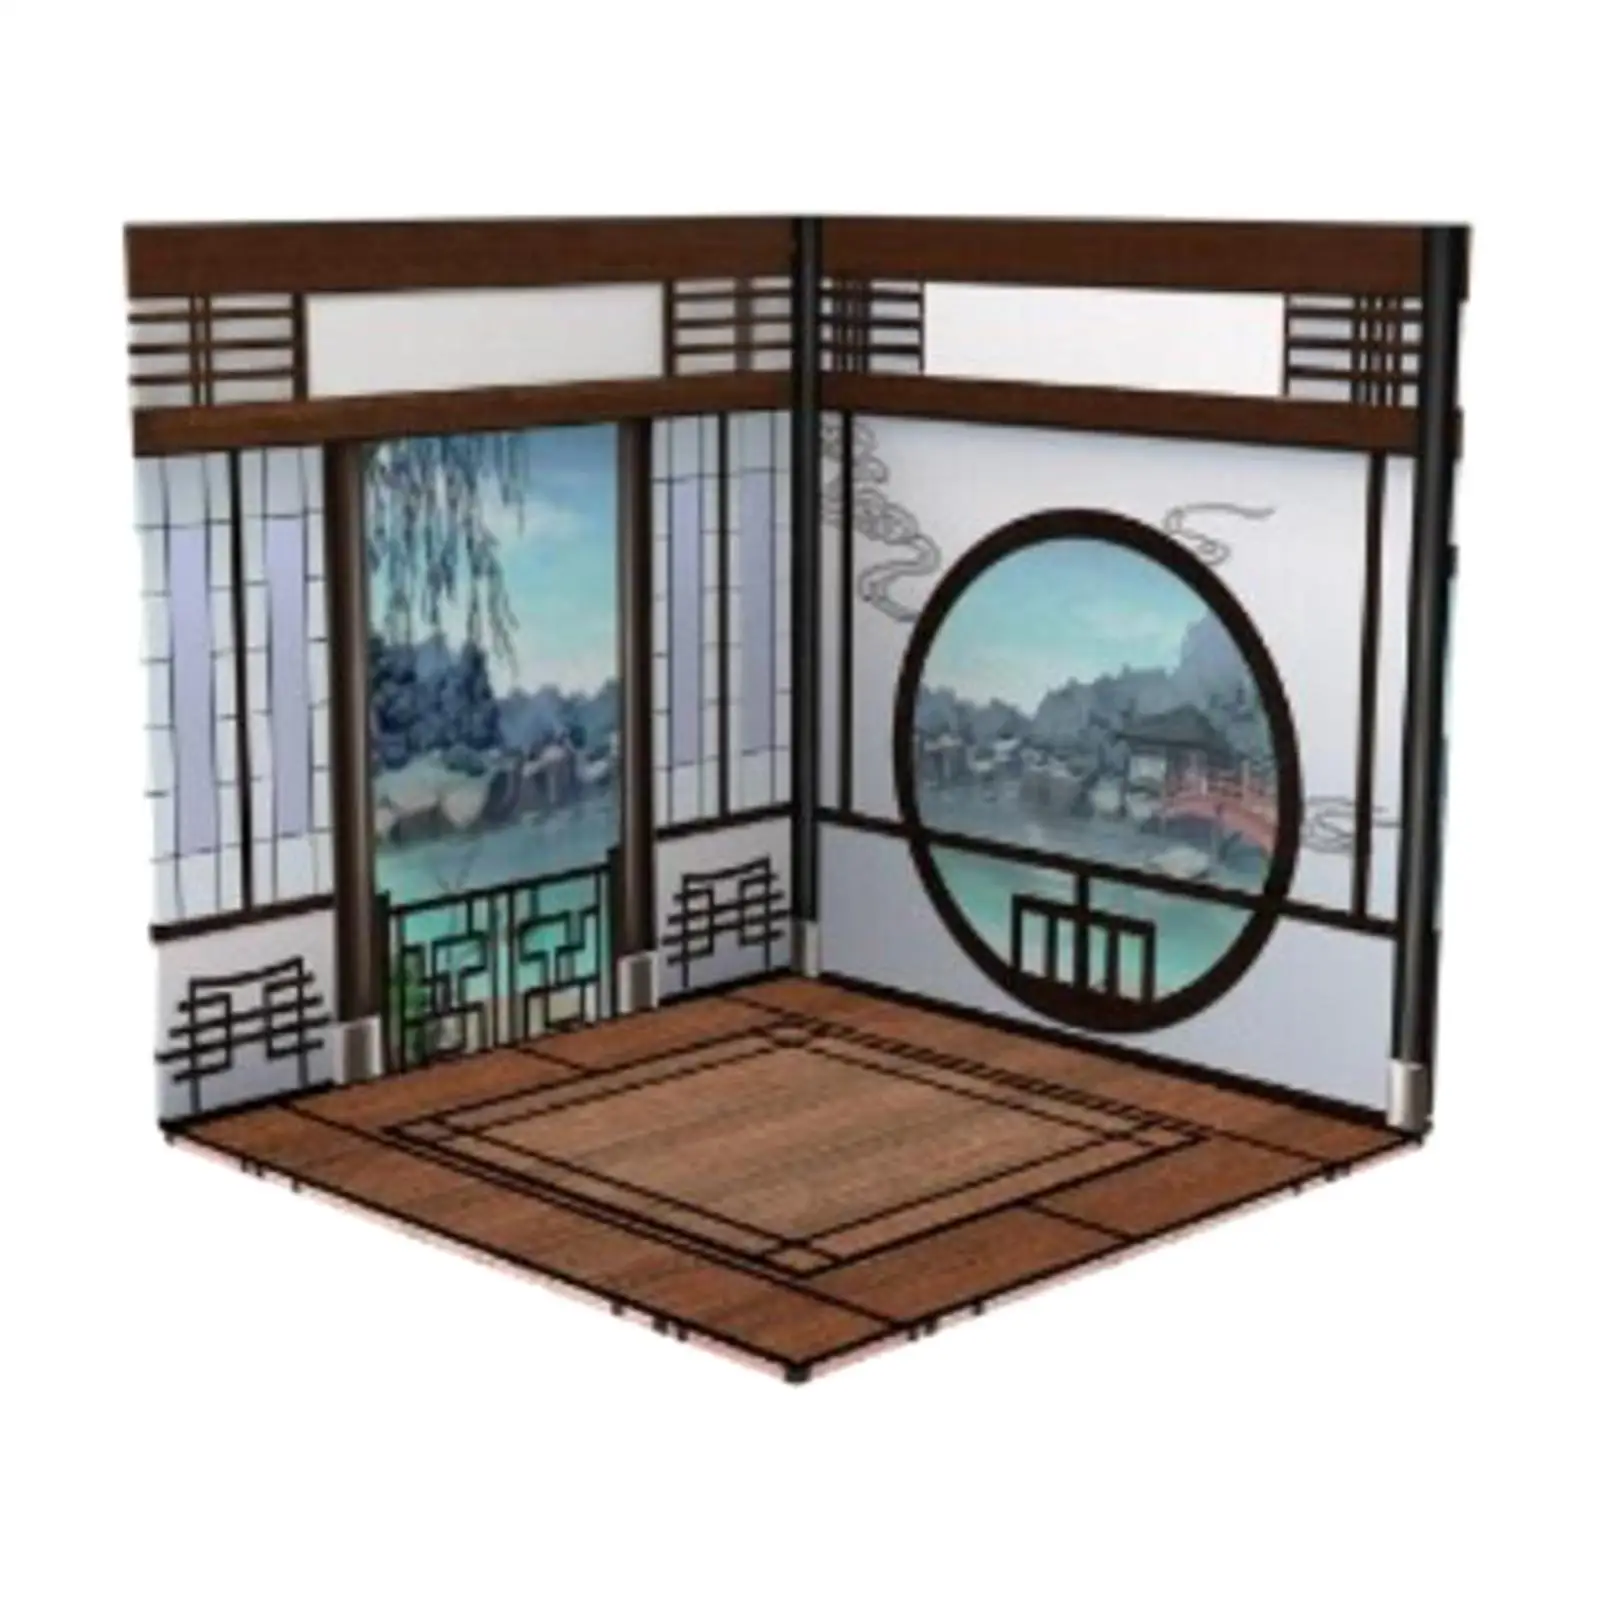 Backdrop Scene Model Simulation Scene Display Collection Background for Action Figures